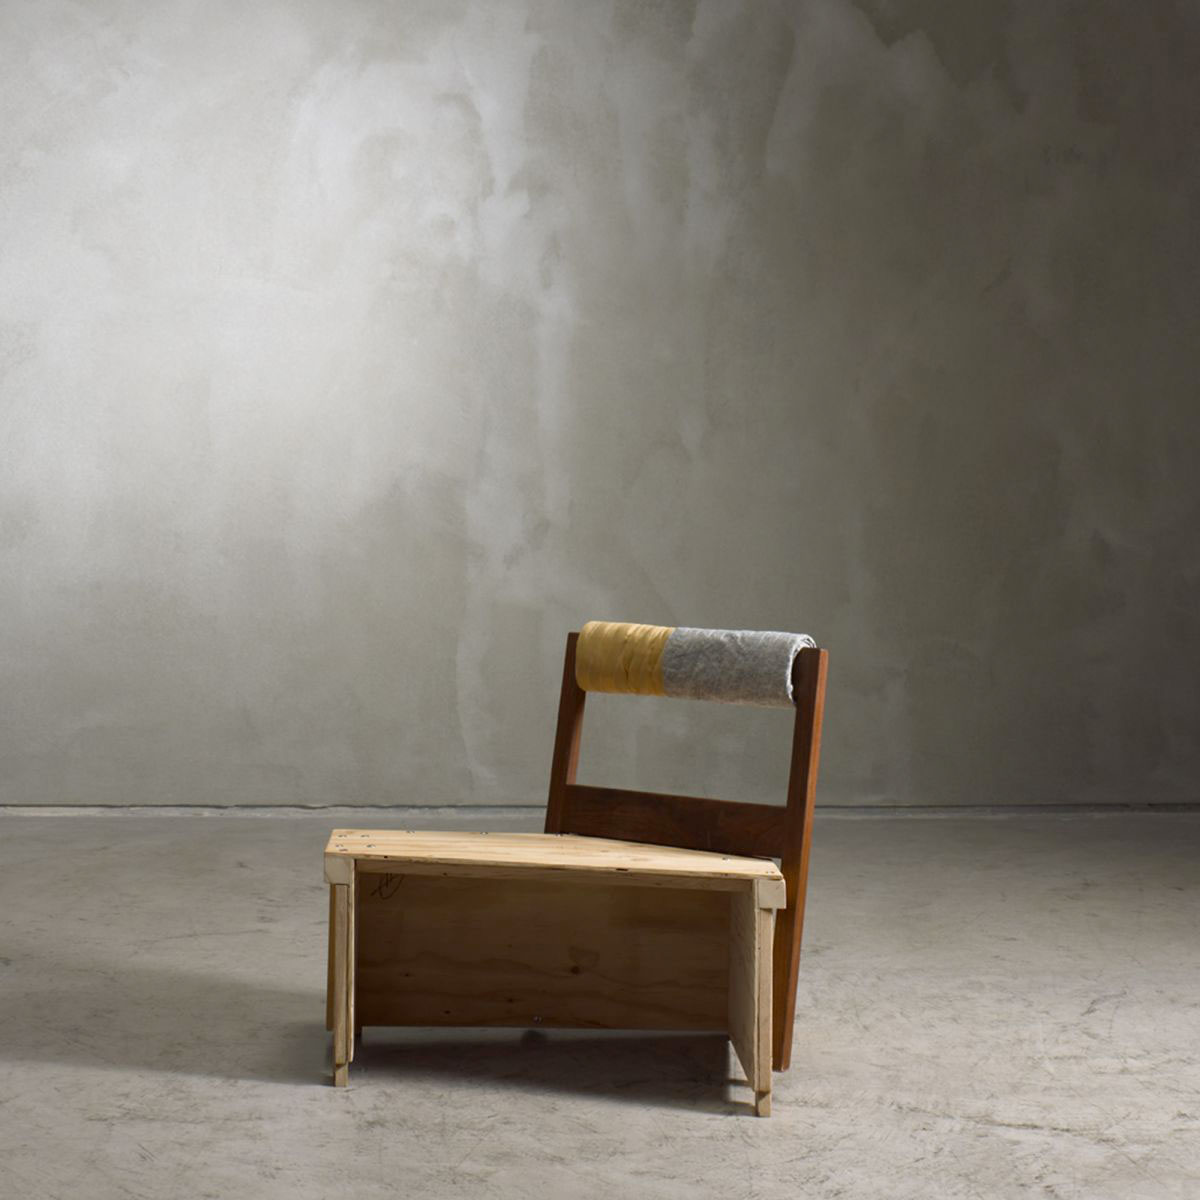 Chair 'Sunday Morning with Harry/Crate Collection' Martino Gamper pic-1